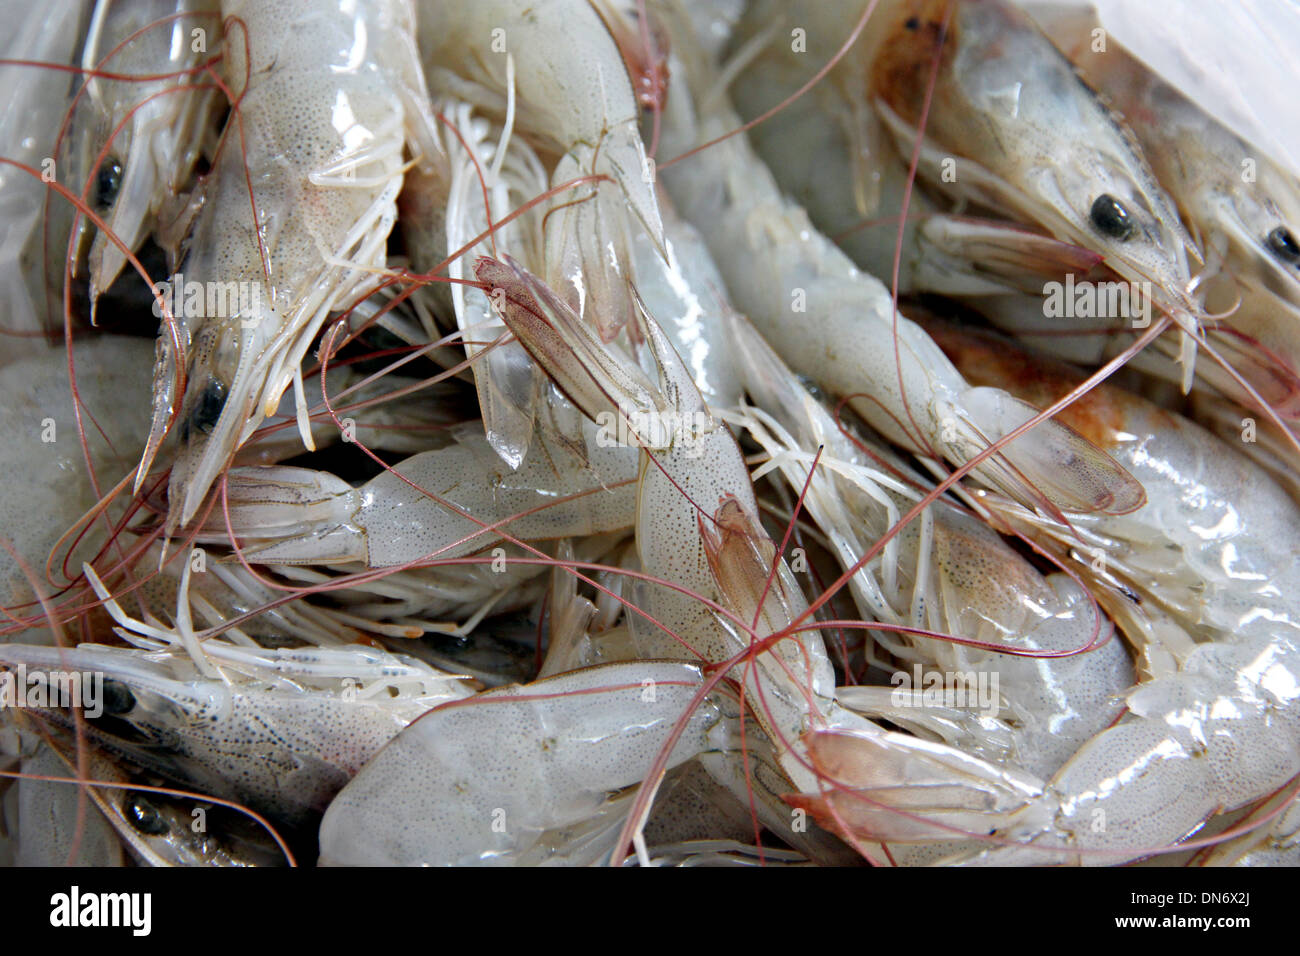 The Picture Many raw shrimp as garnish in cooking. Stock Photo